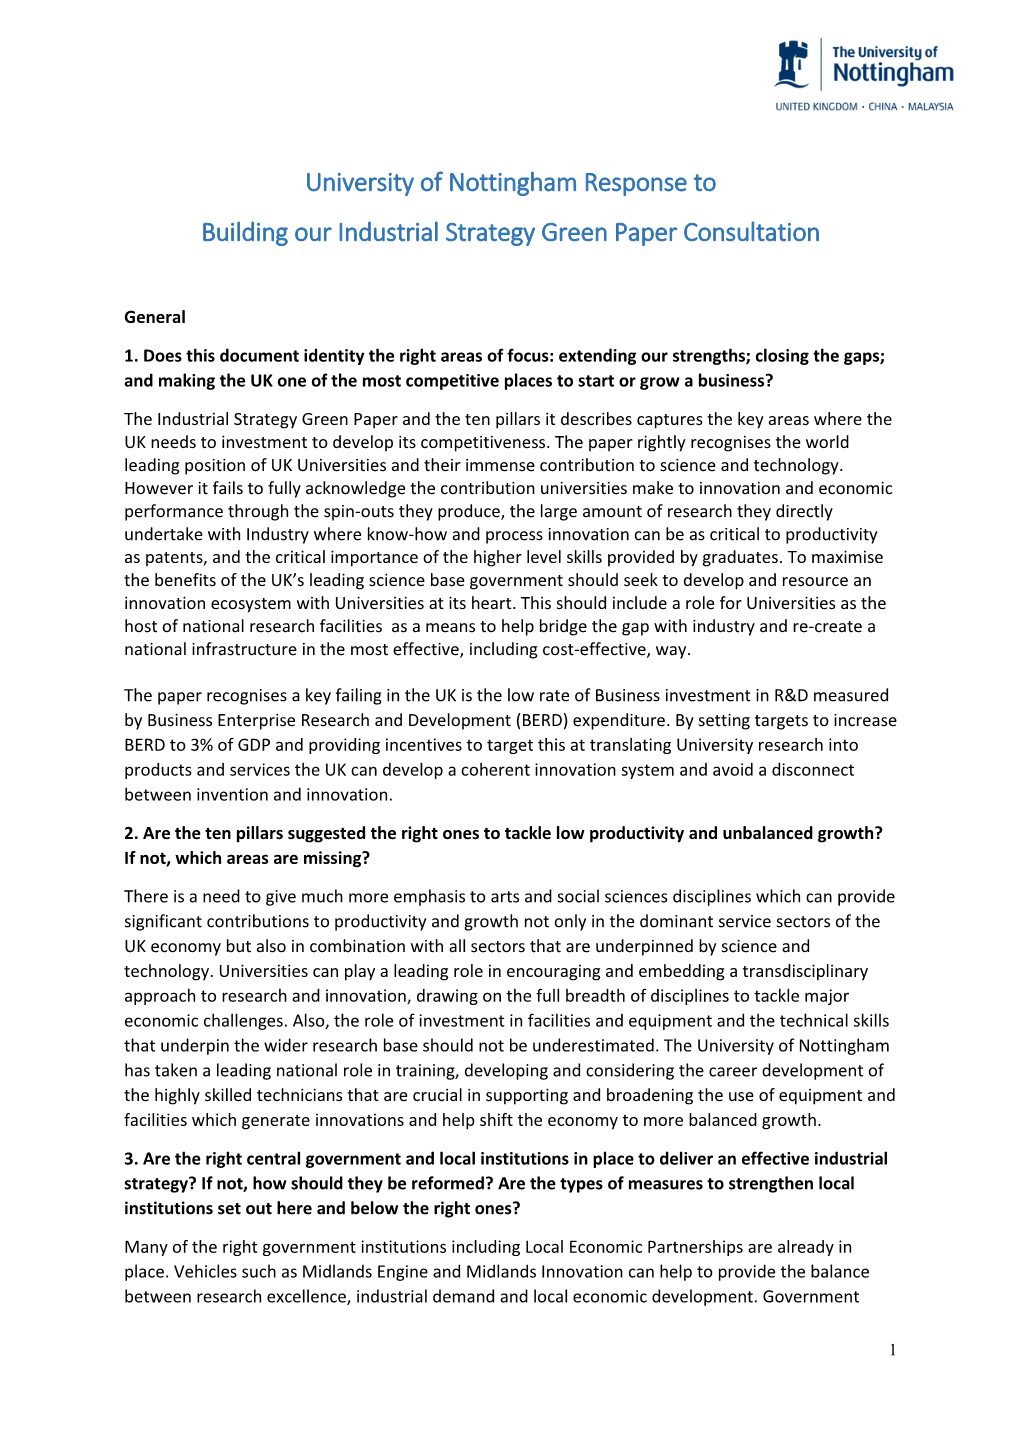 University of Nottingham Response to Building Our Industrial Strategy Green Paper Consultation